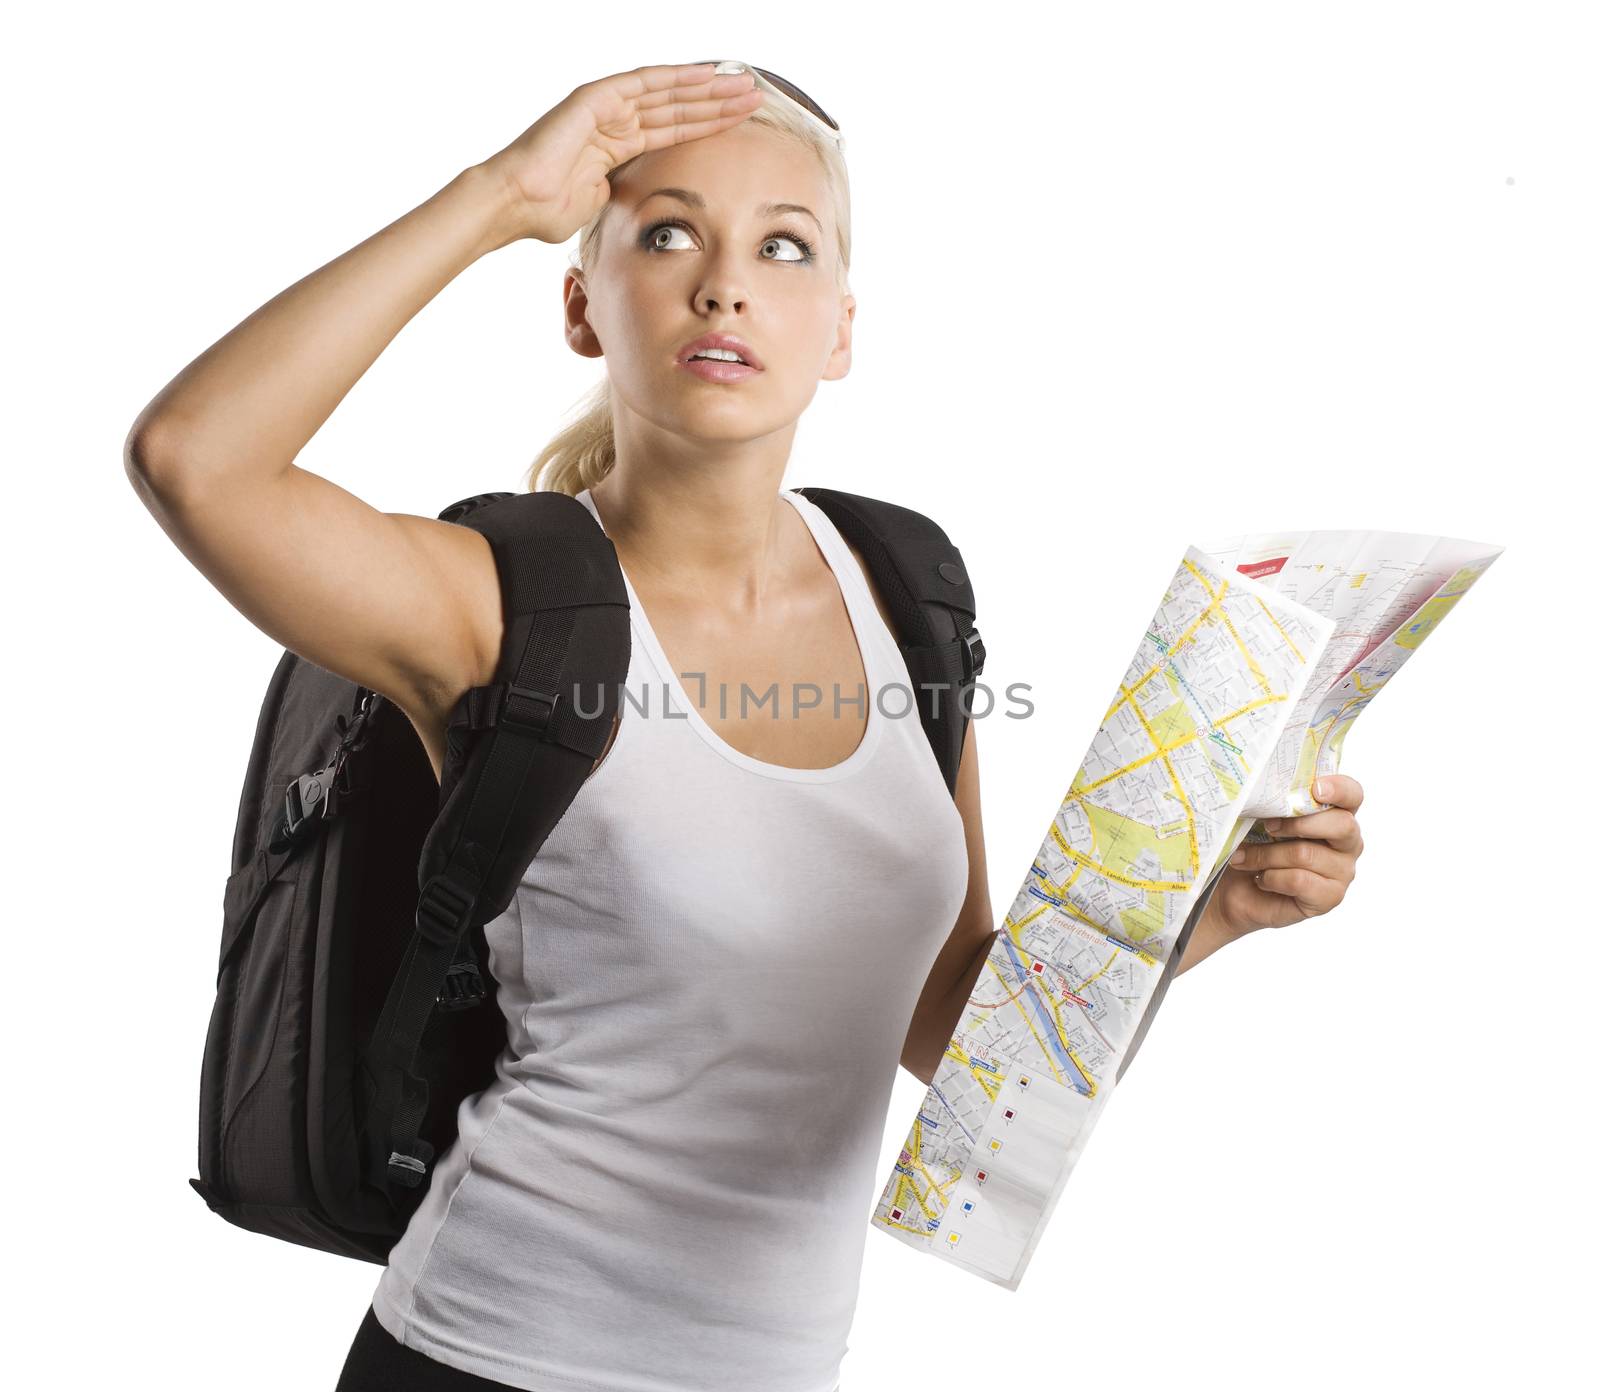 blond young woman carrying a backpack with map looking up